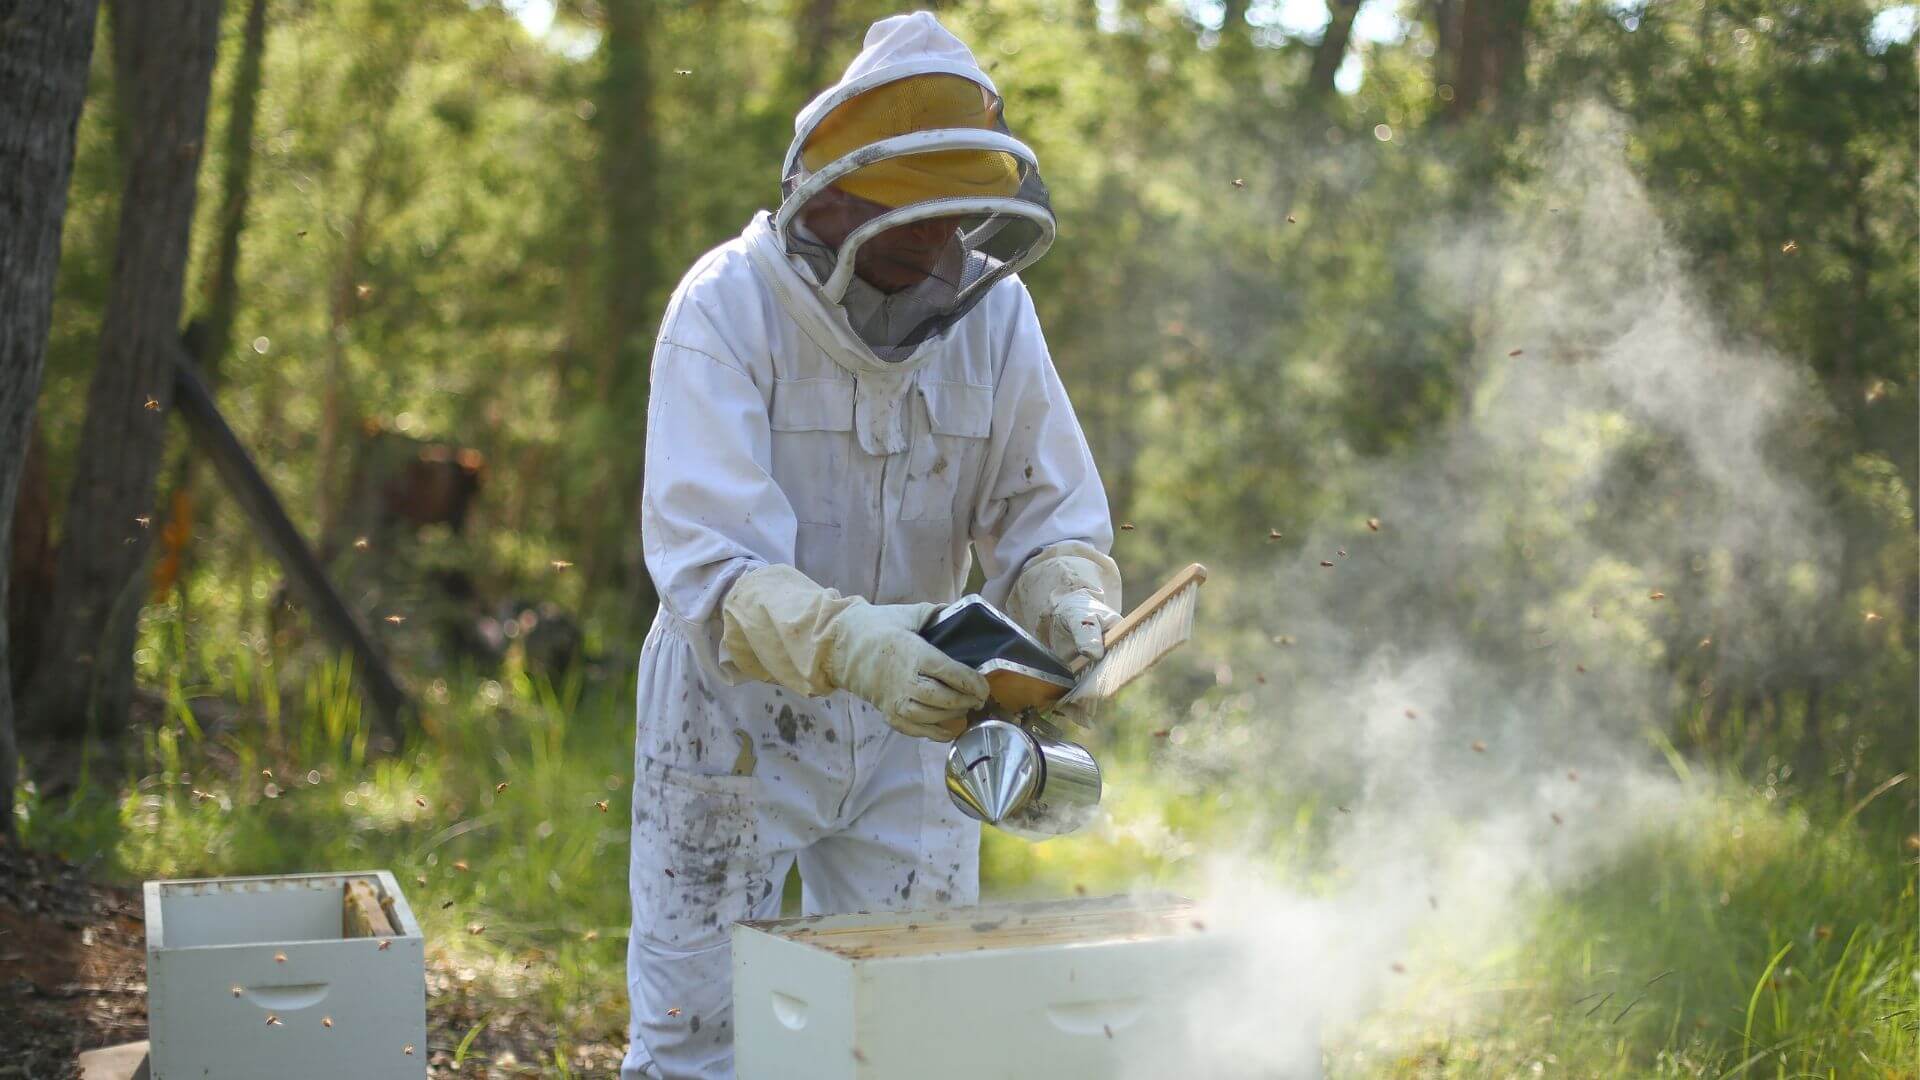 Collombatti Naturals 7 compelling reasons to buy Australian beeswax picture of a beekeeper in the bush